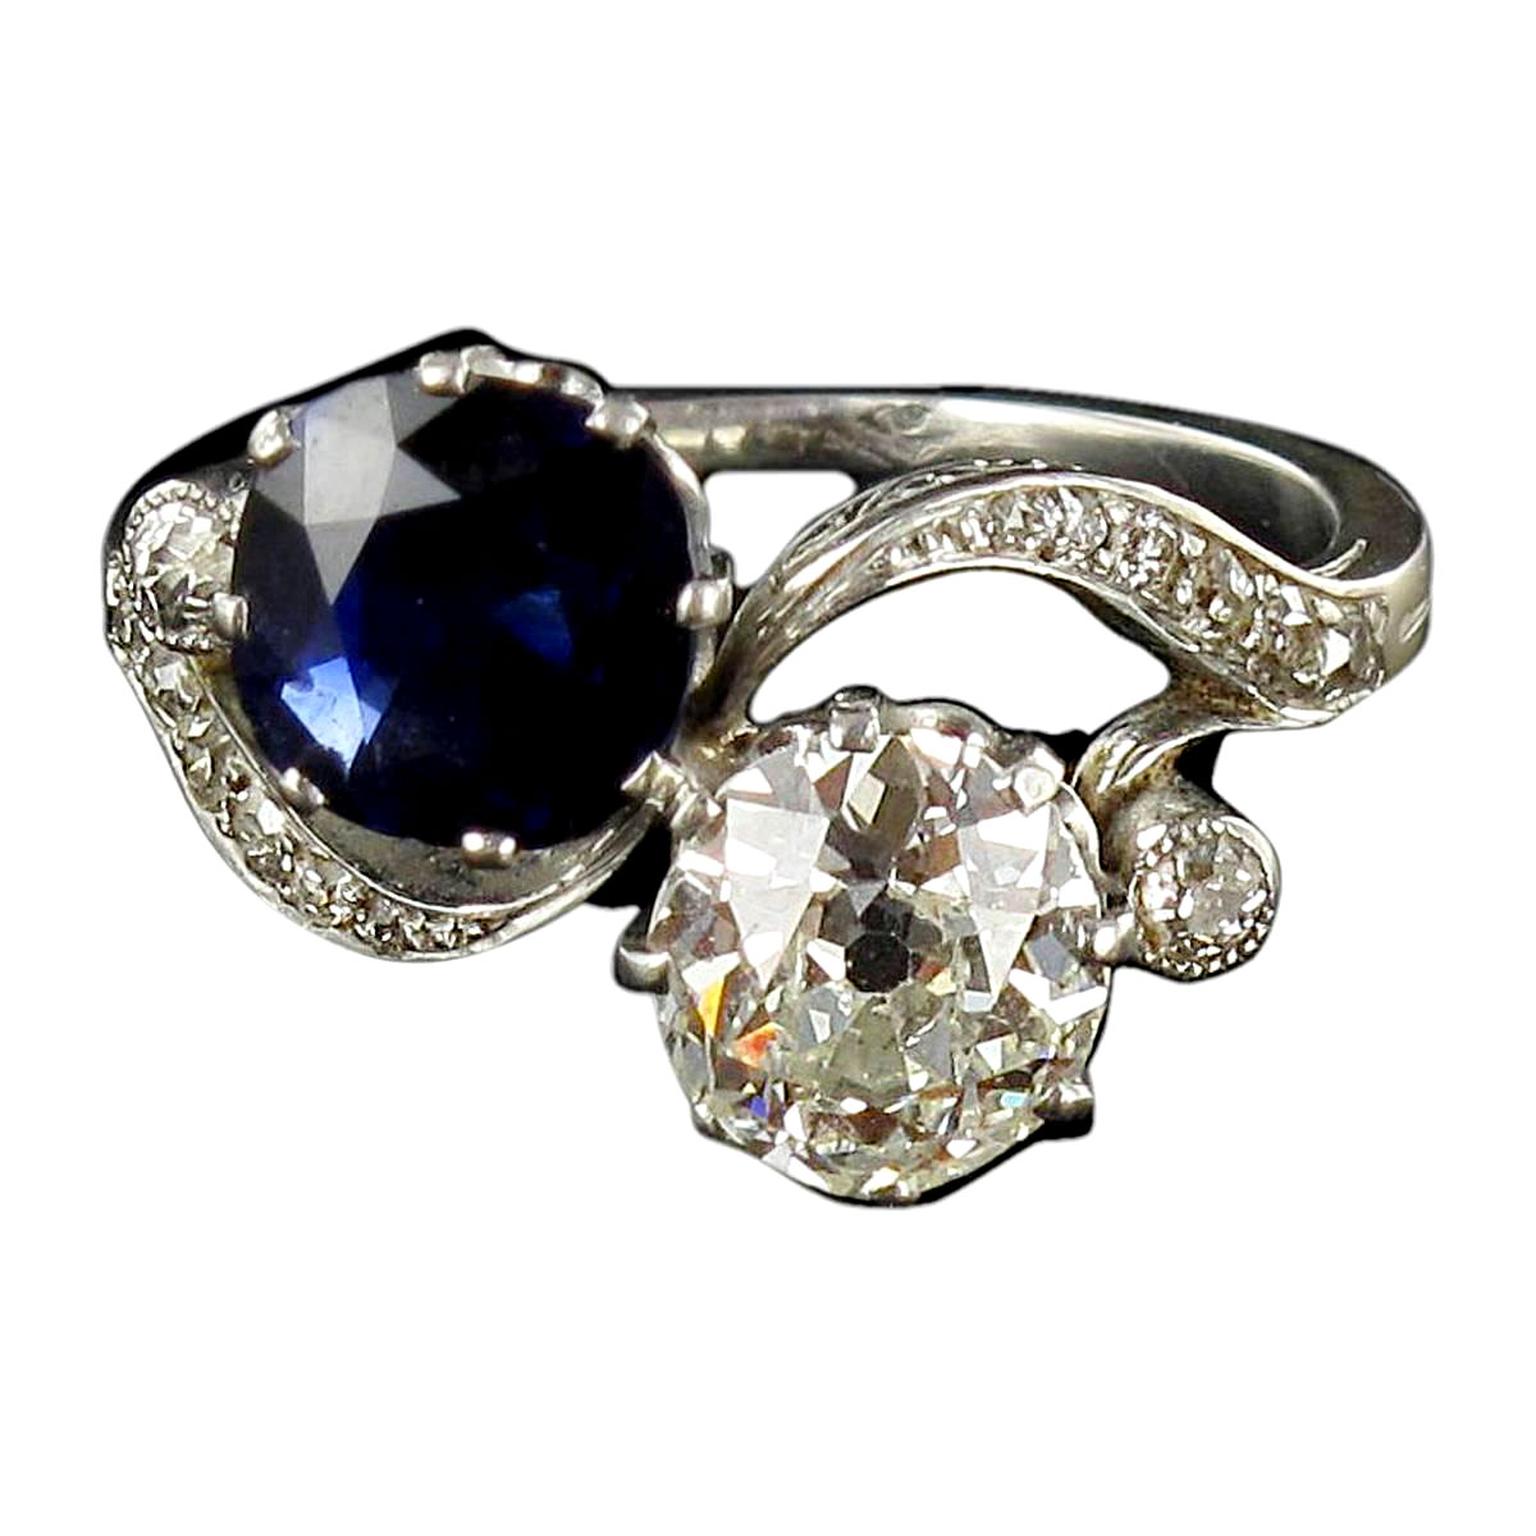 Baume sapphire and diamond ring